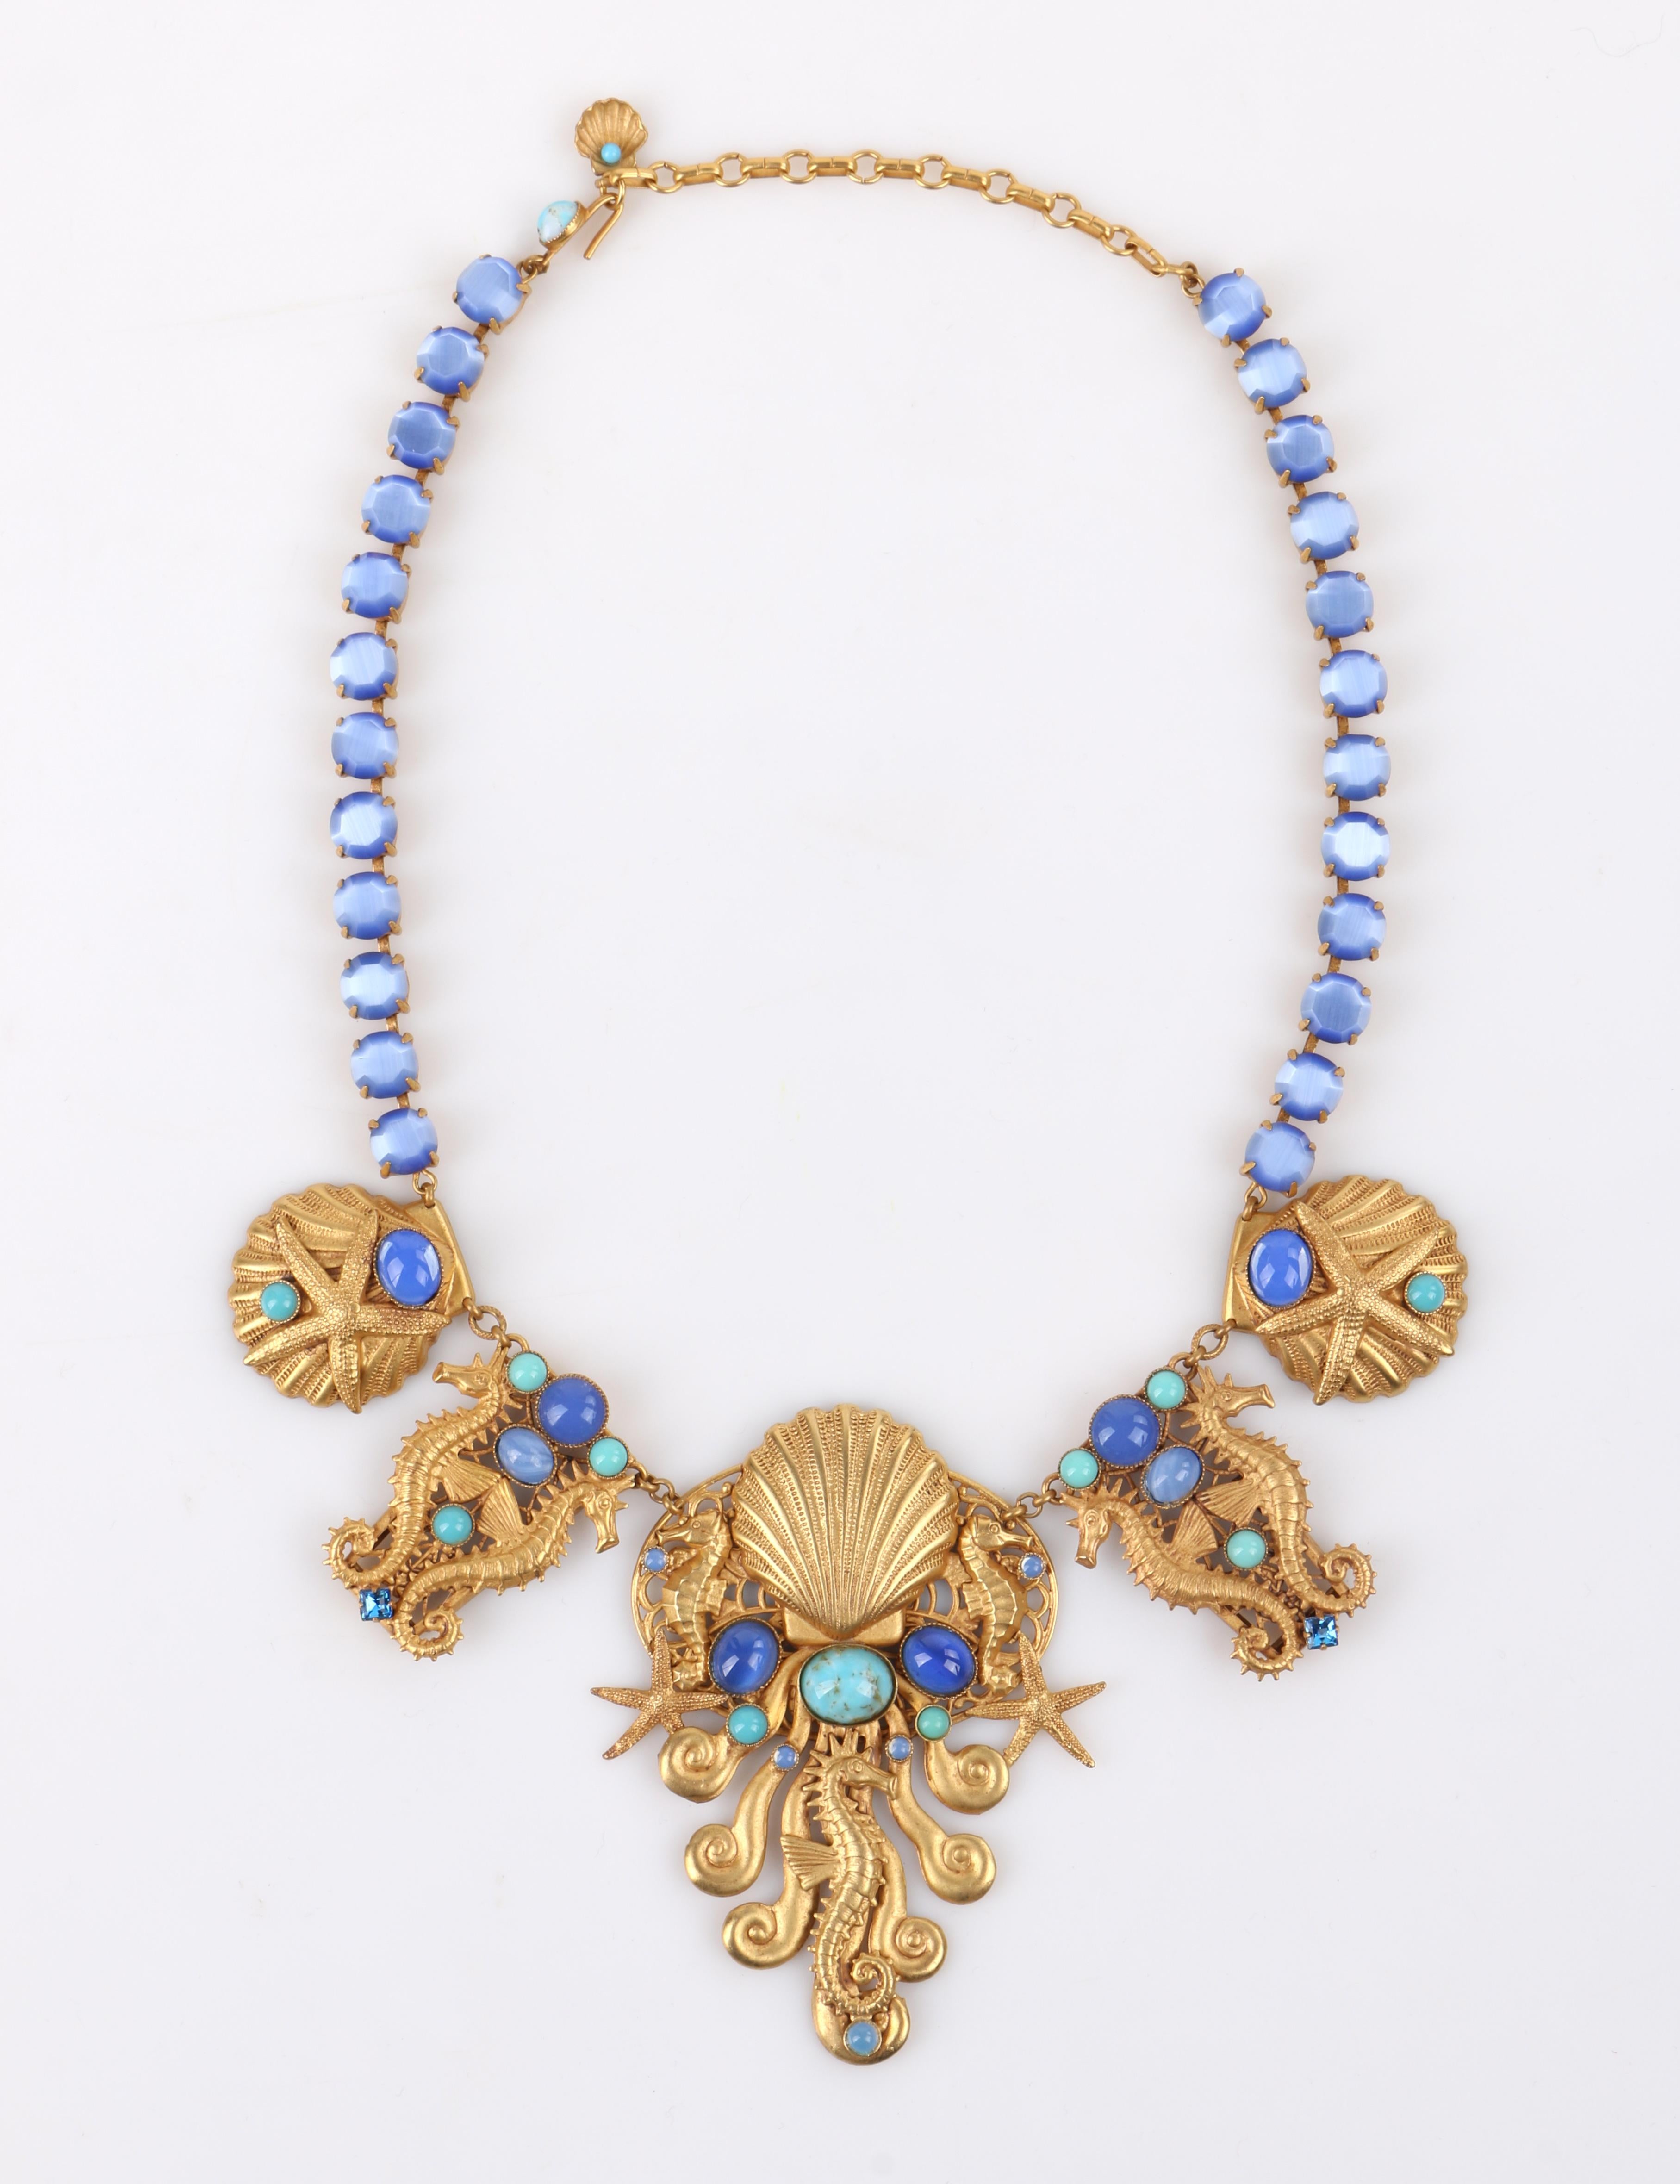 ASKEW LONDON Gold Sea Life Multi-Stone Embellished Bib Necklace Drop Earring Parure Set

Brand / Manufacturer: Askew London
Style: Bib necklace; chandelier earrings
Color(s): Shades of gold (metal); shades of blue and turquoise (stones)
Unmarked